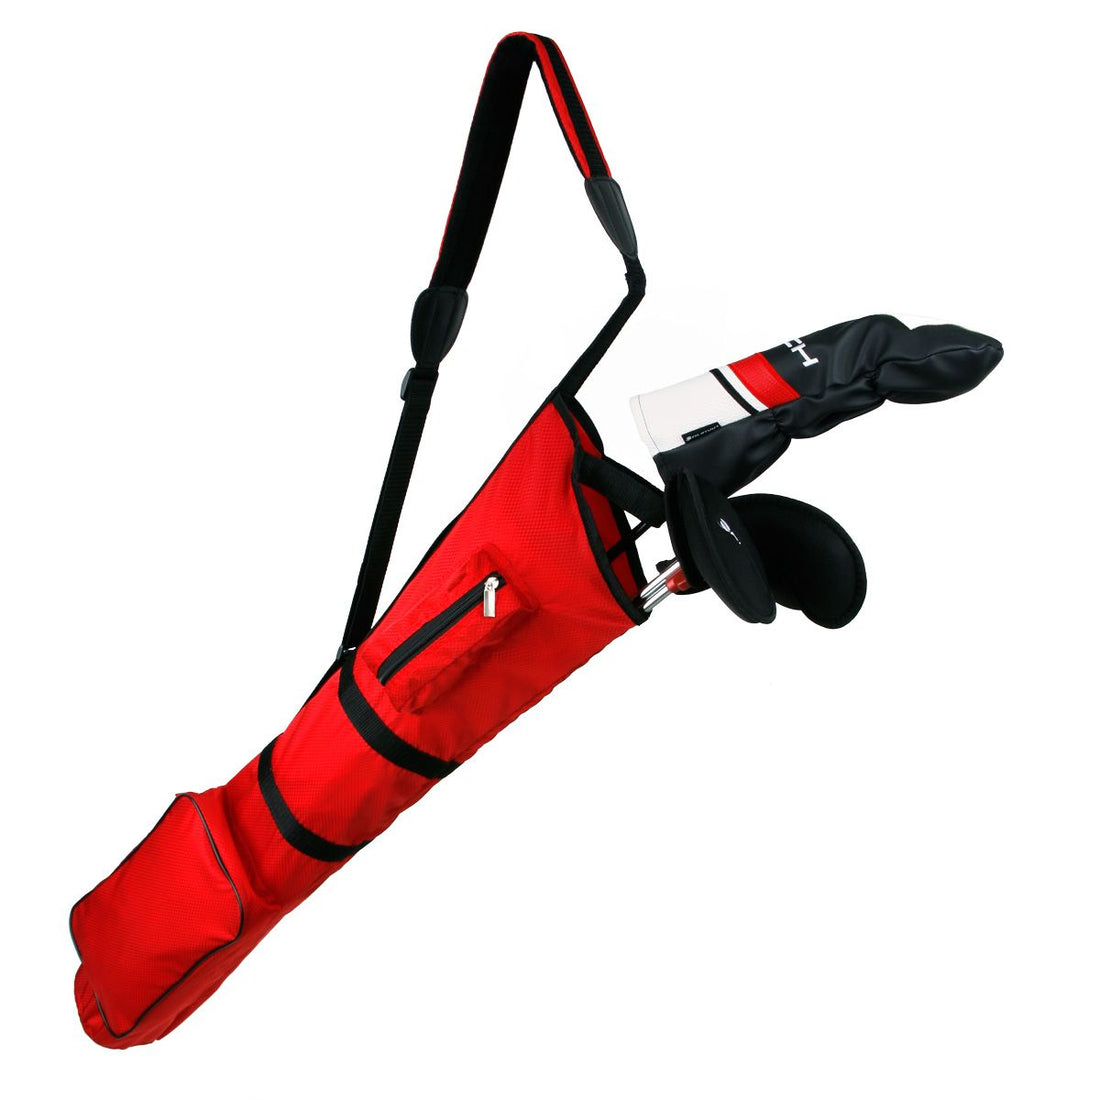 3 golf clubs with headcovers inside a red Orlimar Sunday Golf Bag with shoulder strap extended